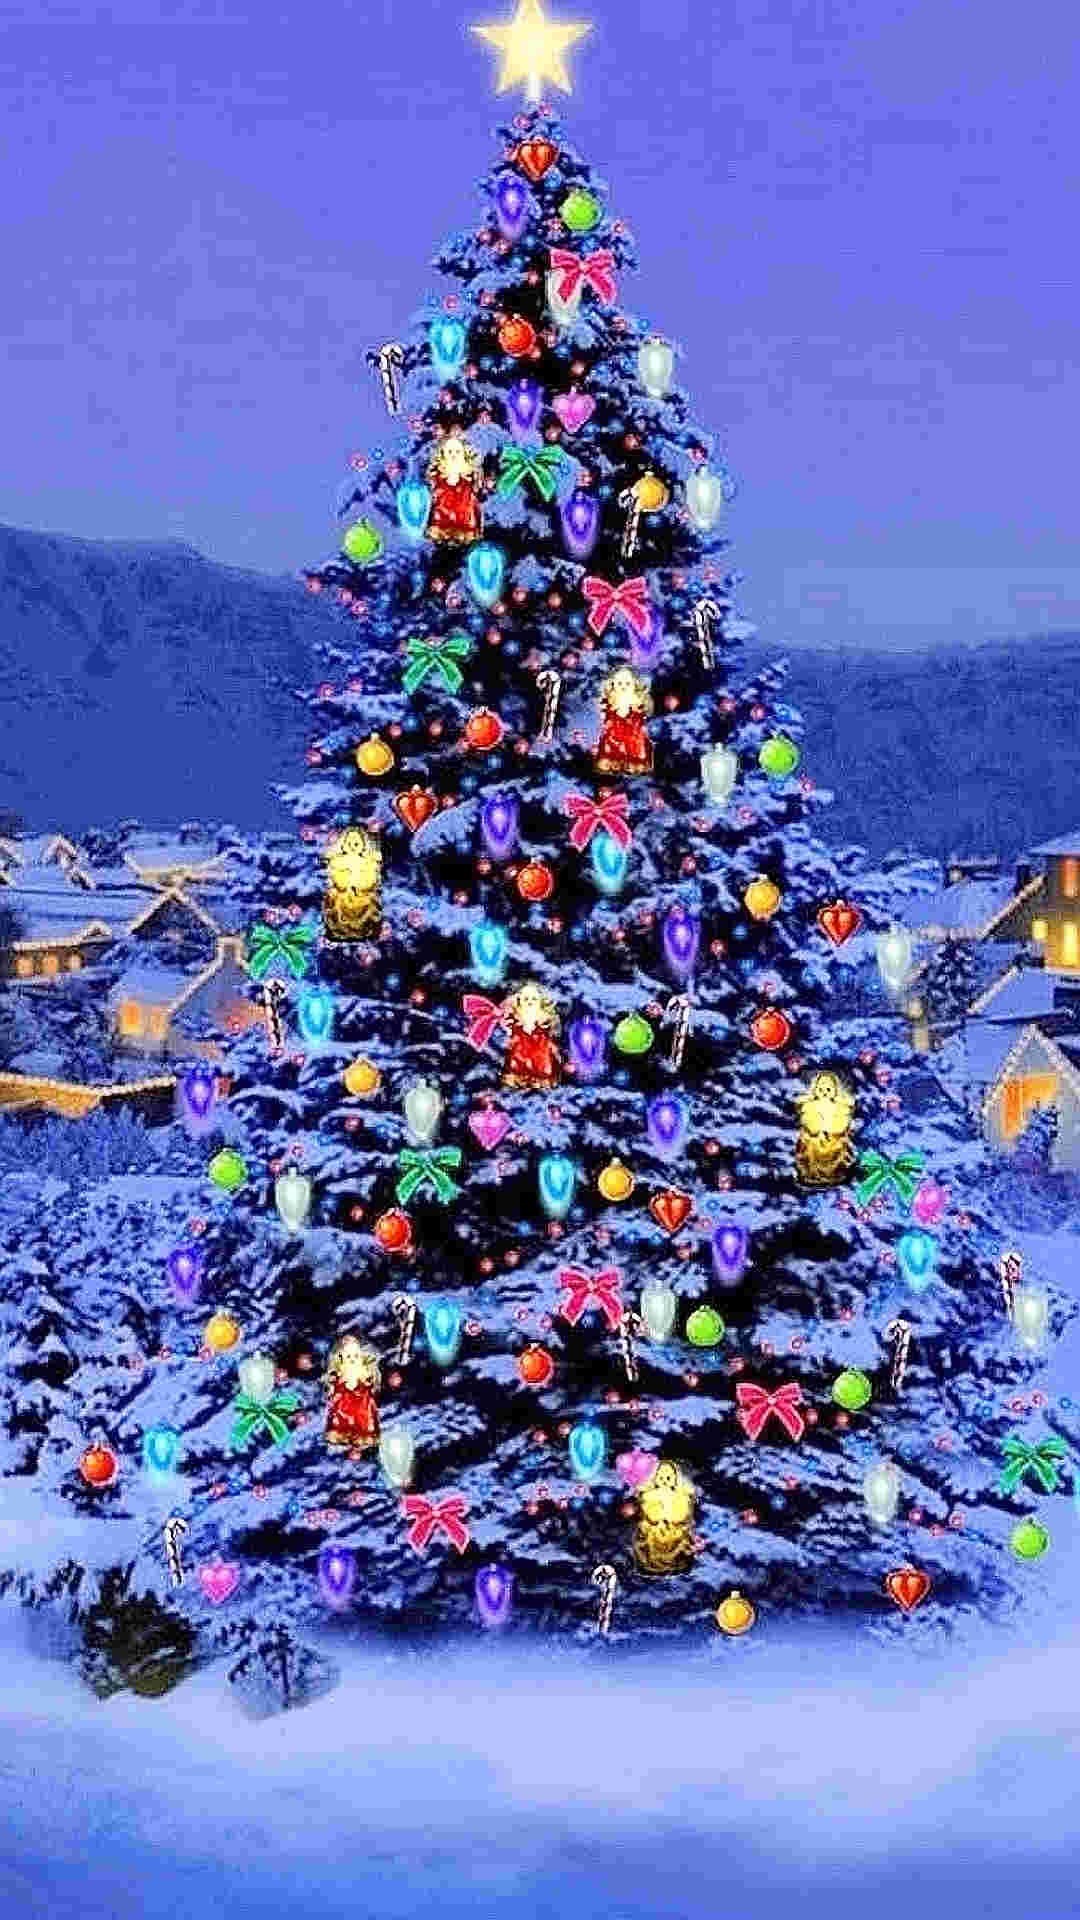 1080x1920 bling bling Christmas tree with star iPhone 6 plus wallpaper #2014 # Christmas #tree